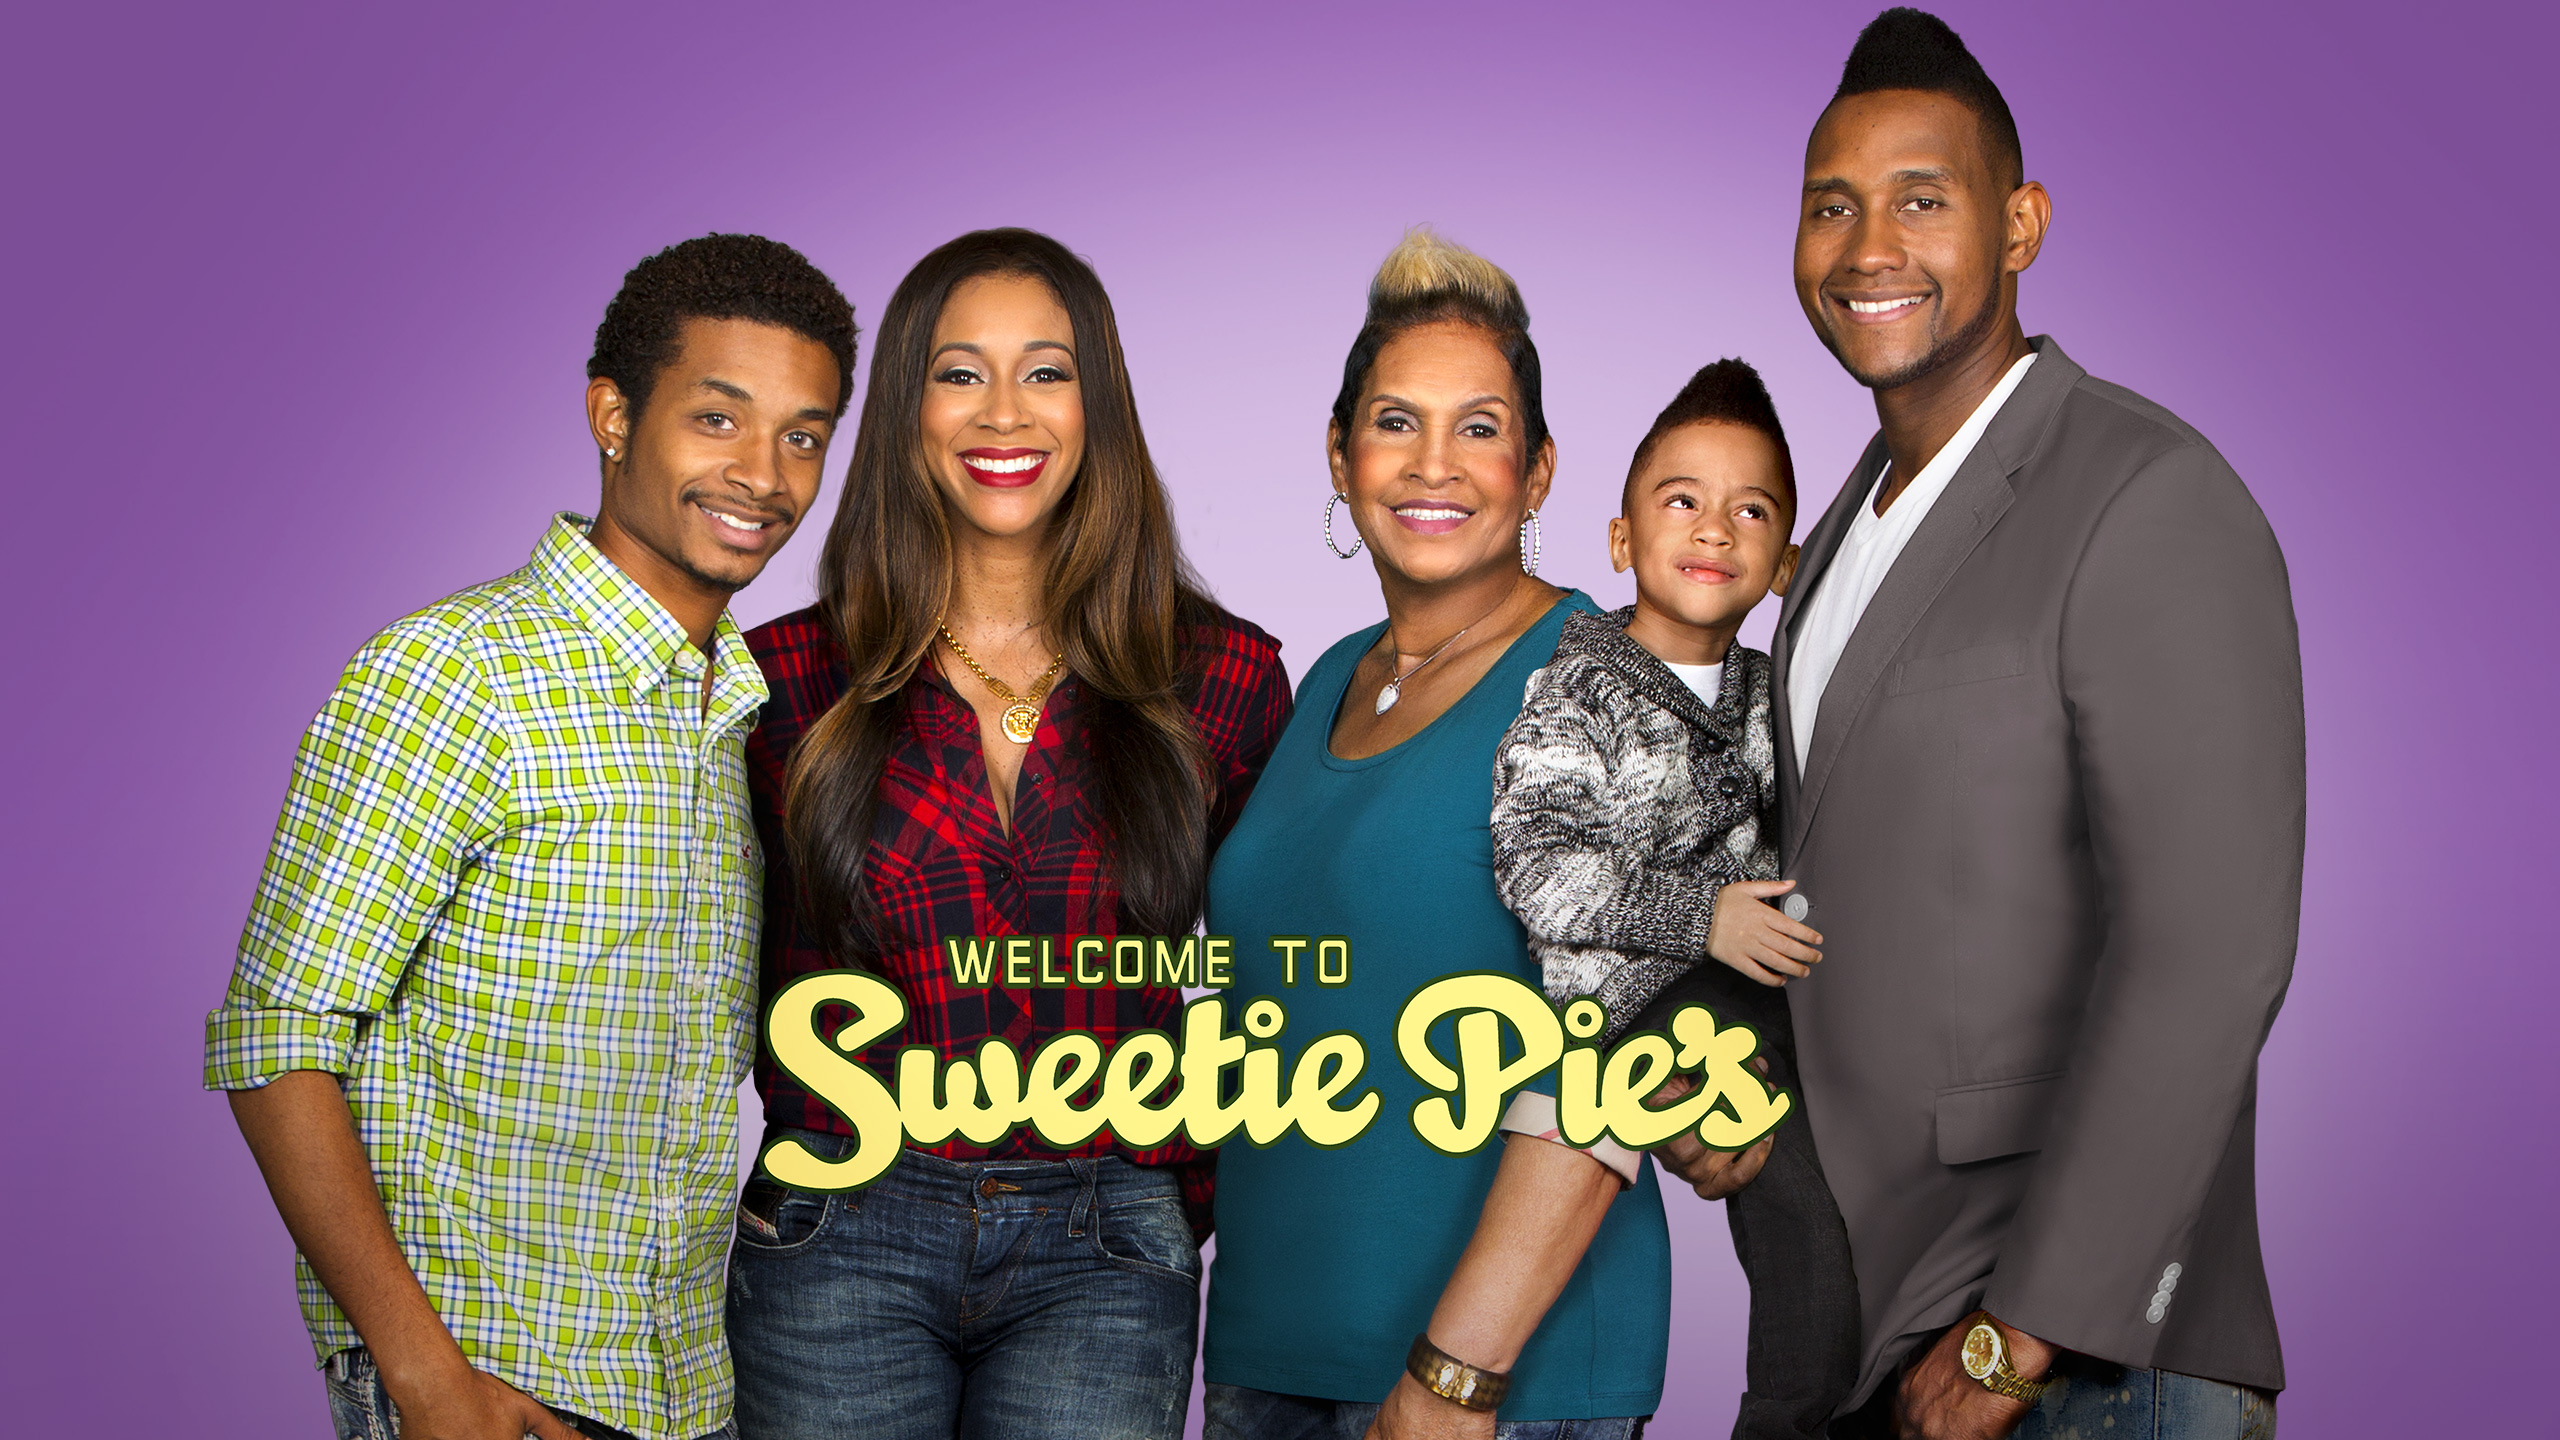 andre welcome to sweetie pies